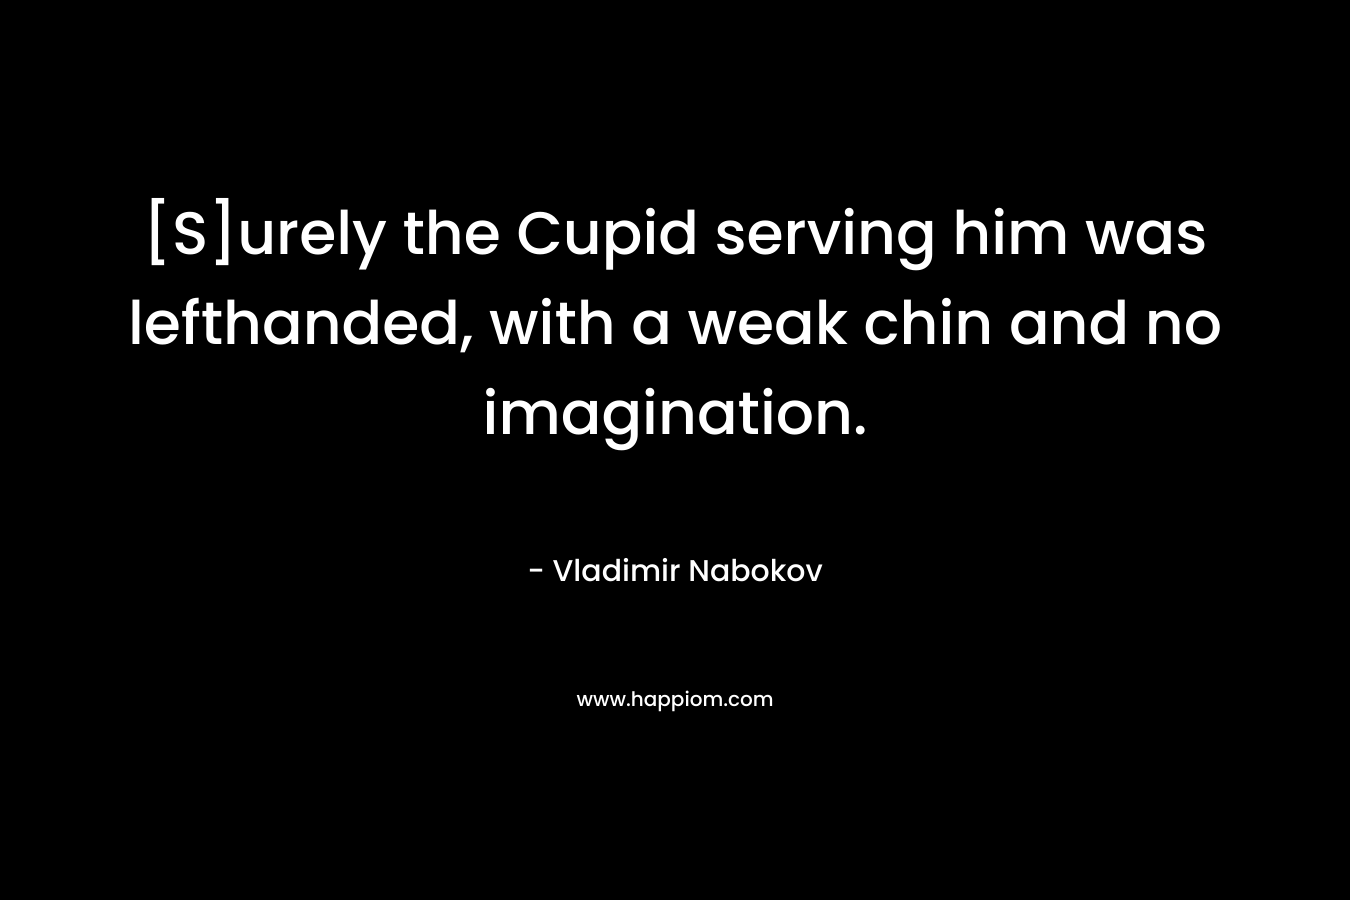 [S]urely the Cupid serving him was lefthanded, with a weak chin and no imagination.